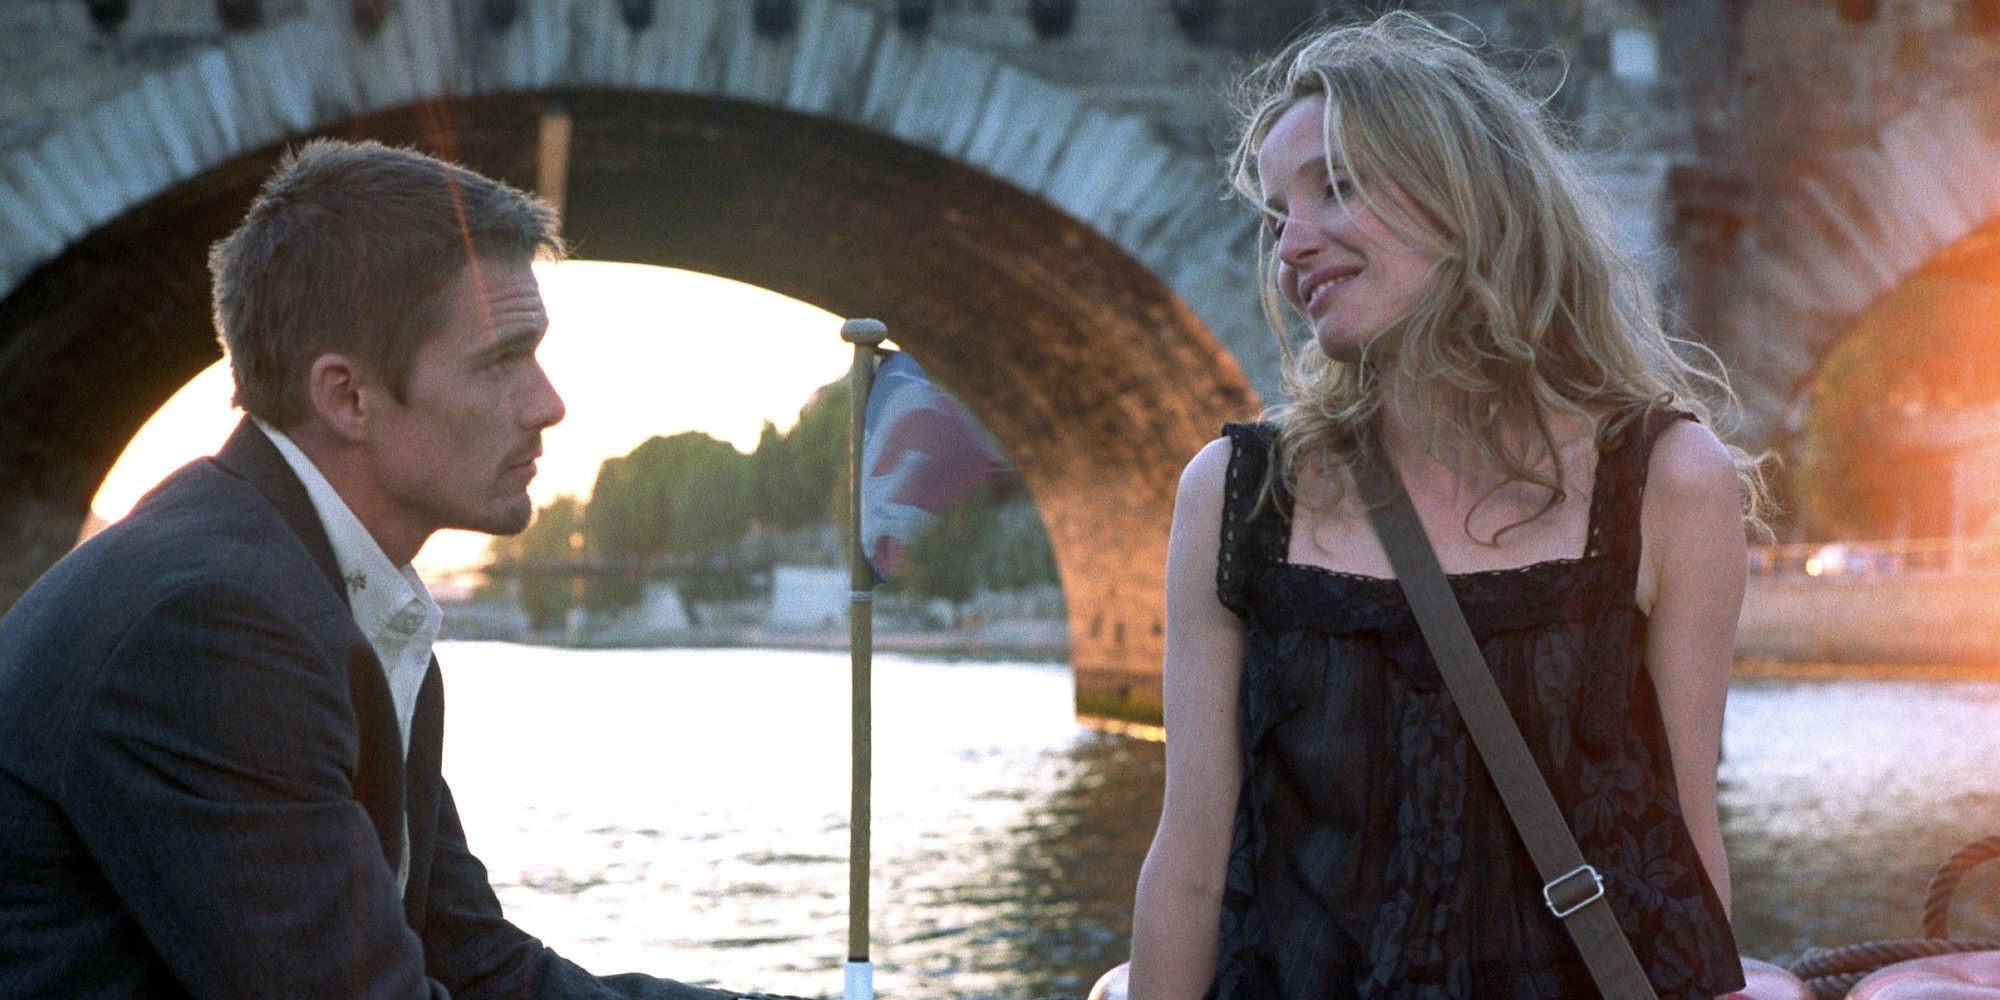 Ethan Hawke and Julie Delpy in 